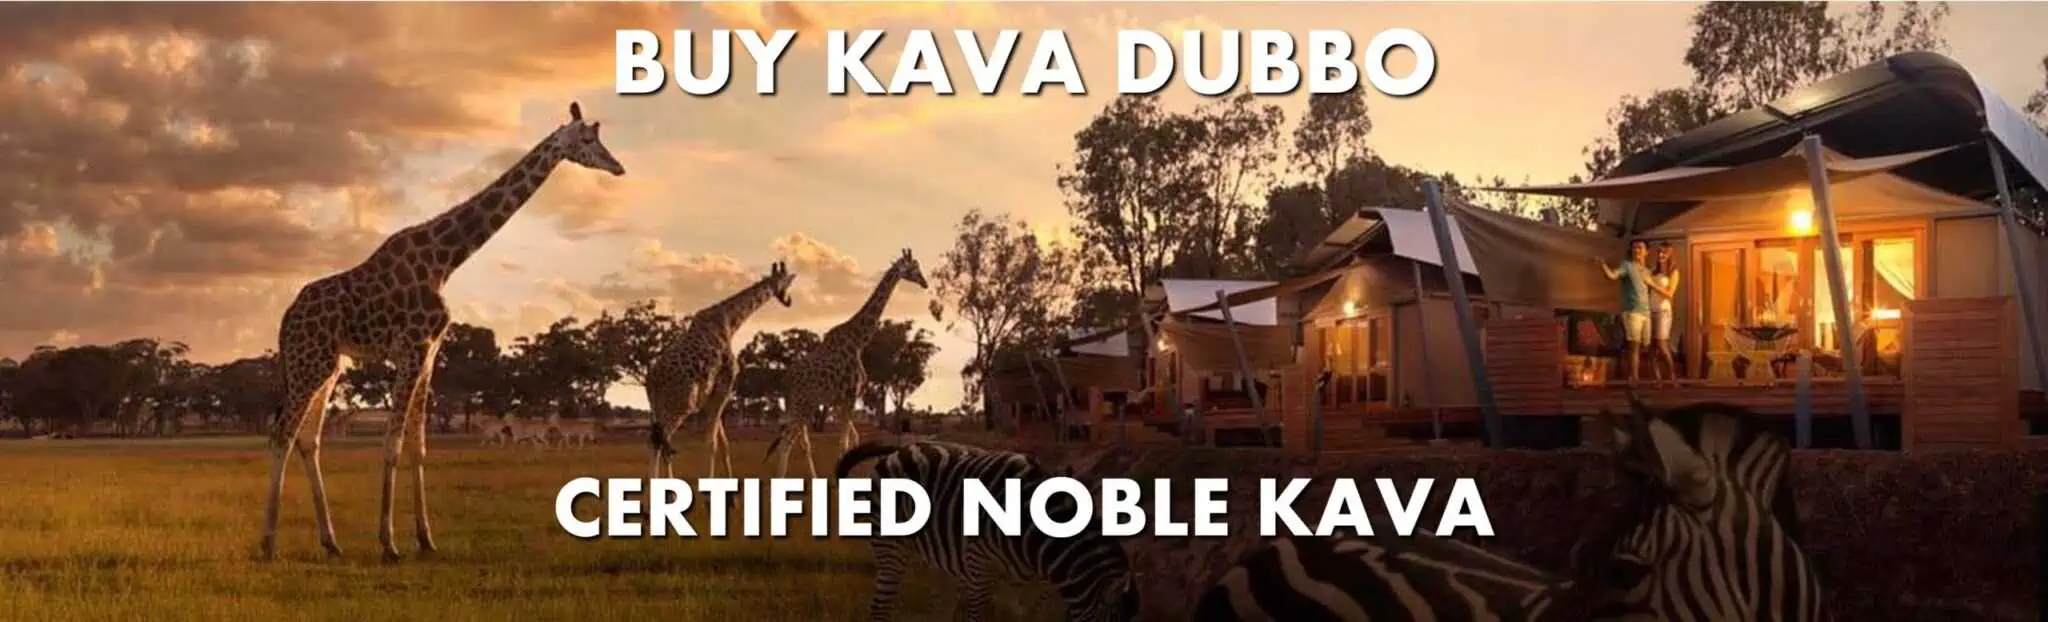 Giraffes in Western Plains Zoo Dubbo New South Wales with caption Buy Kava Dubbo Certified Noble Kava